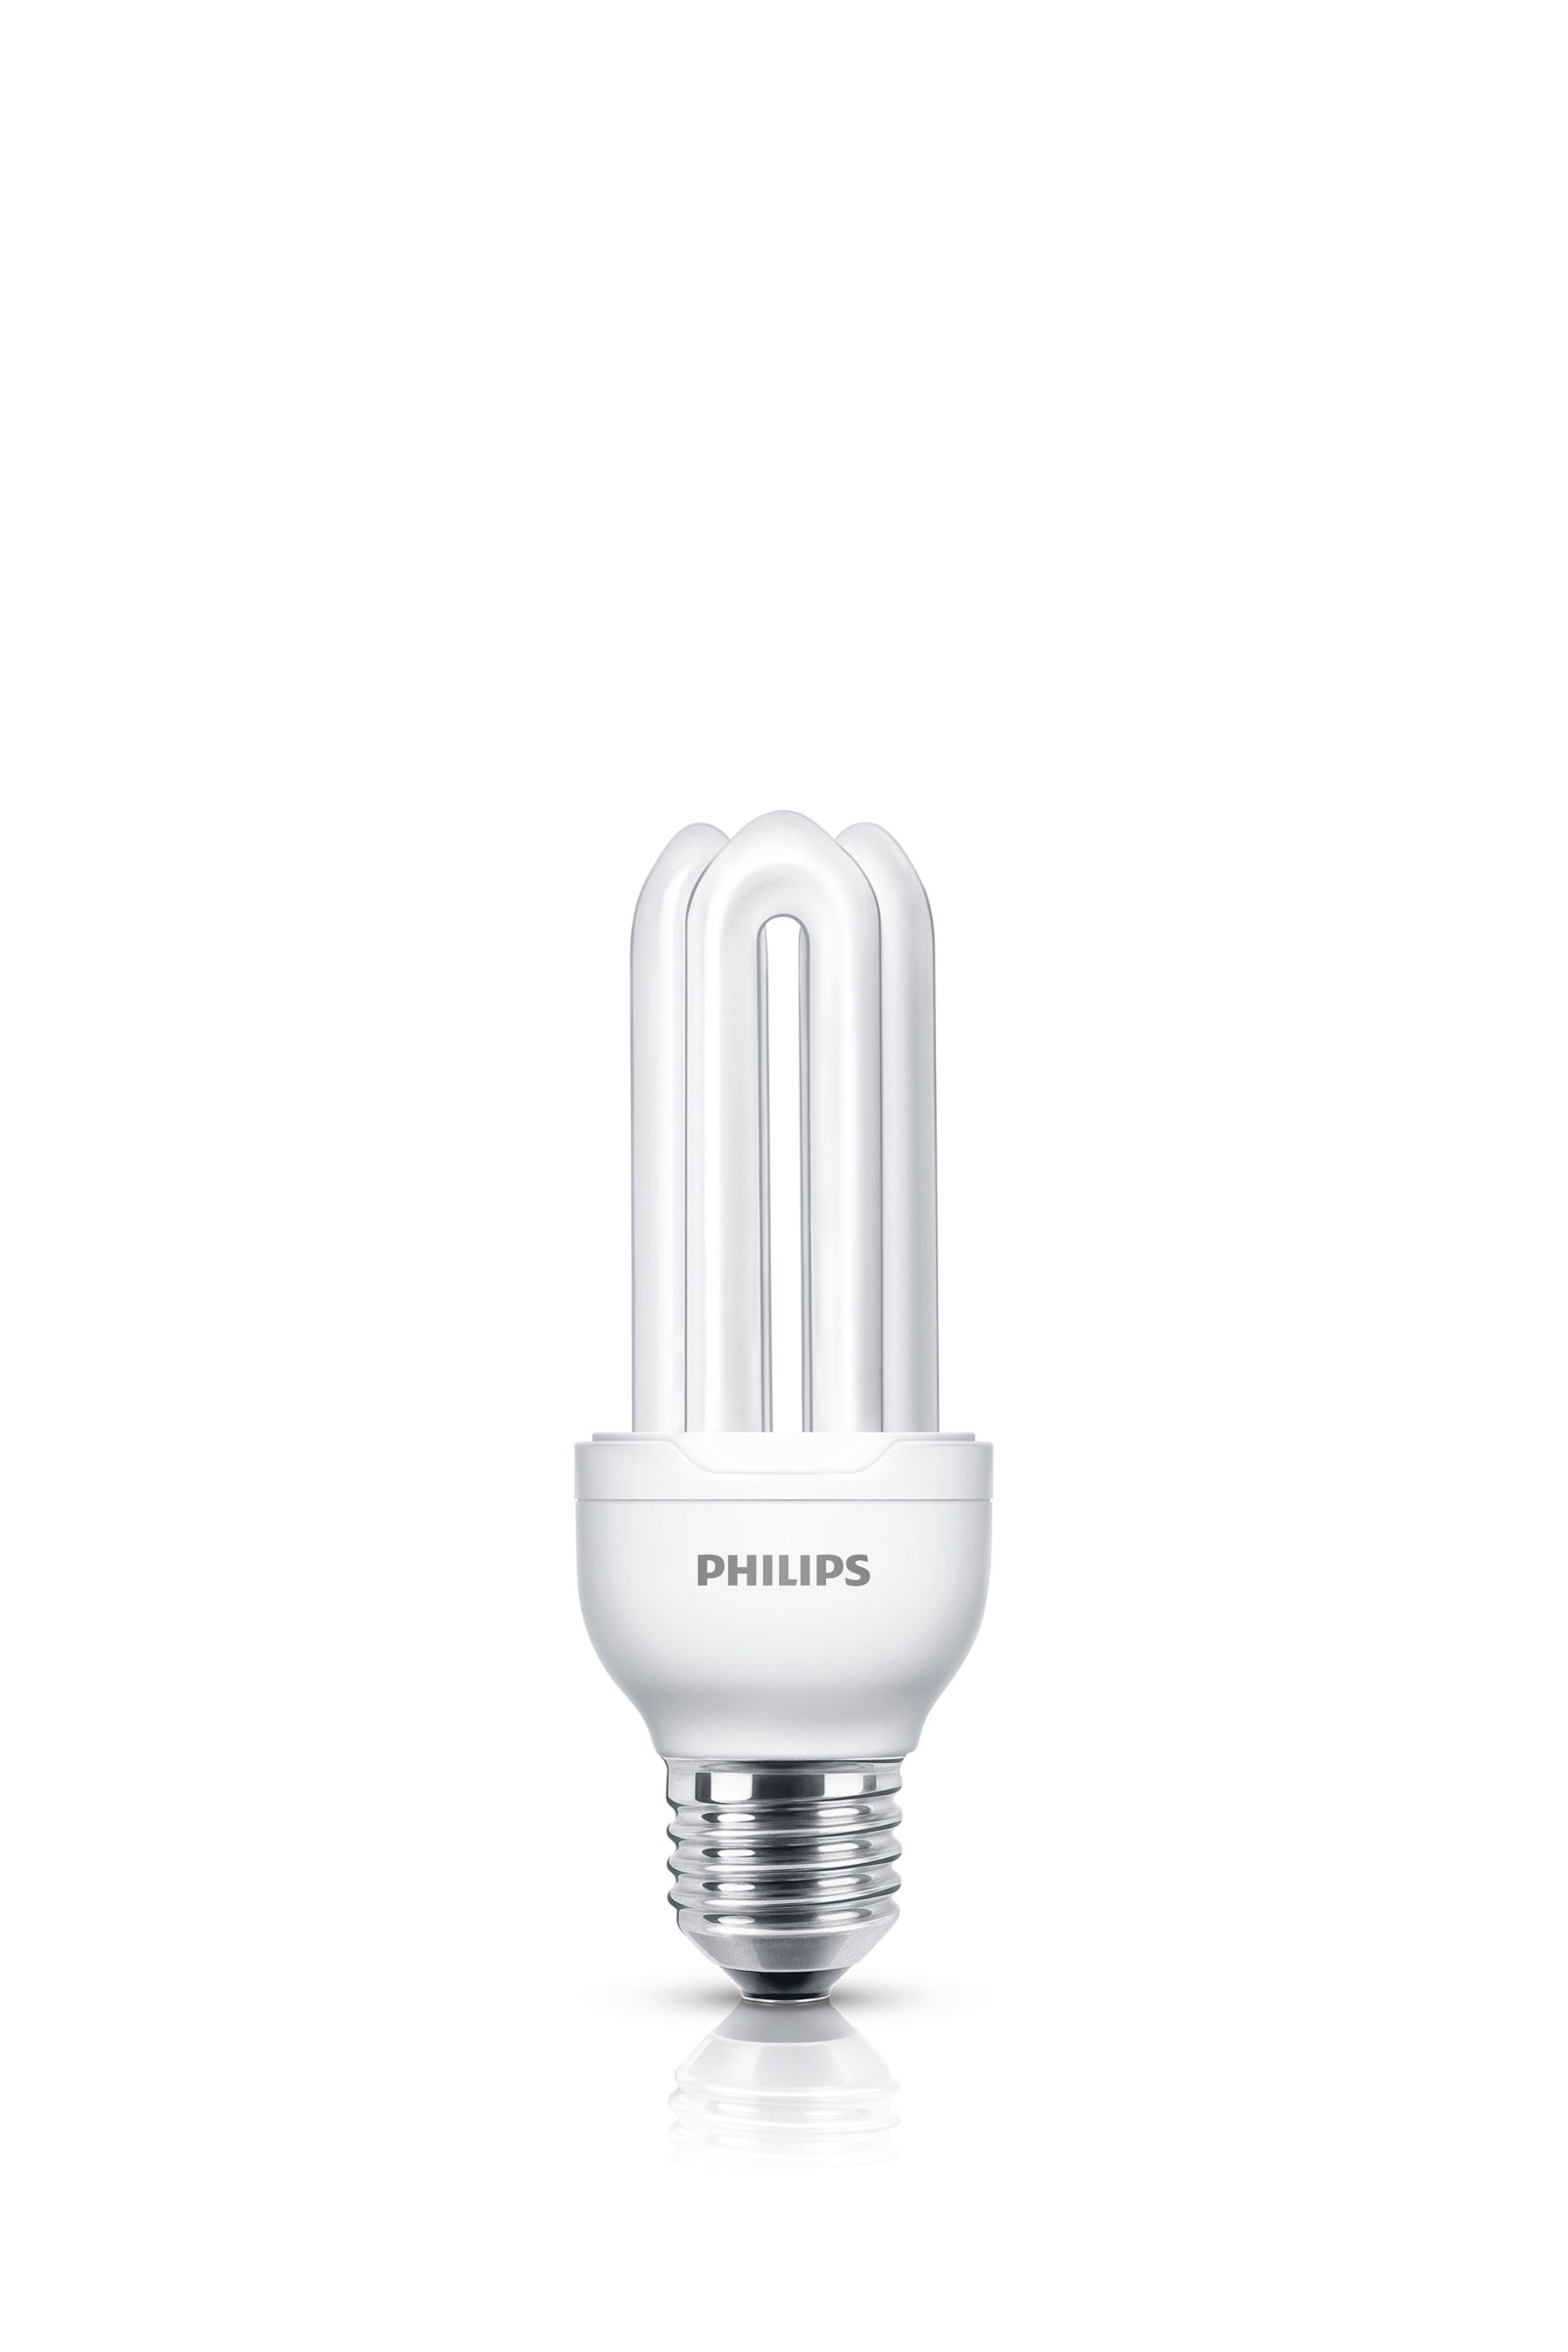 Philips Energy Saving 2D Style CFL Lamp 16W 2 Pin 1050lm